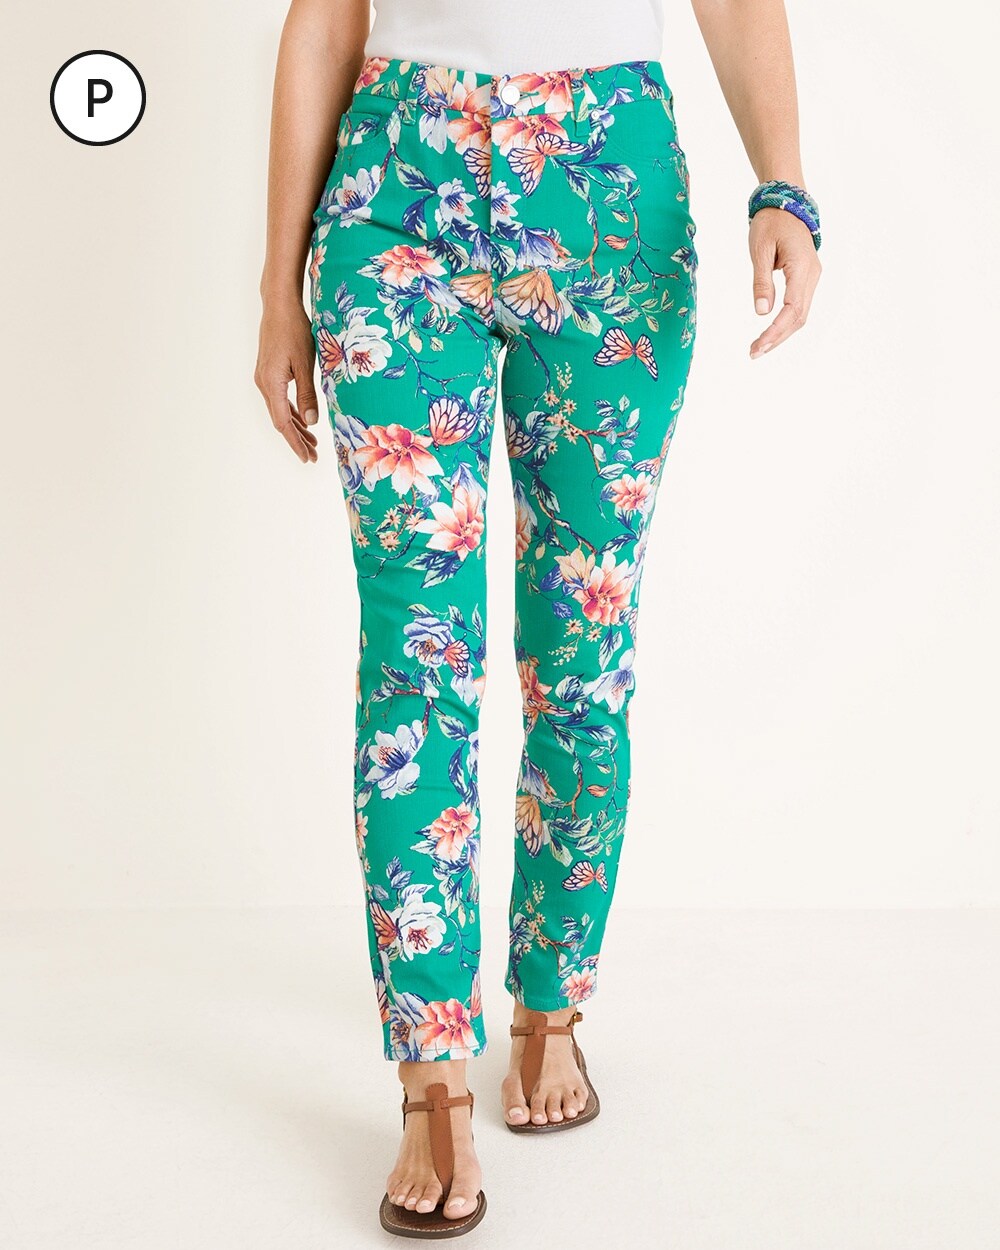 So Slimming Petite Butterfly Garden-Print Ankle Jeans